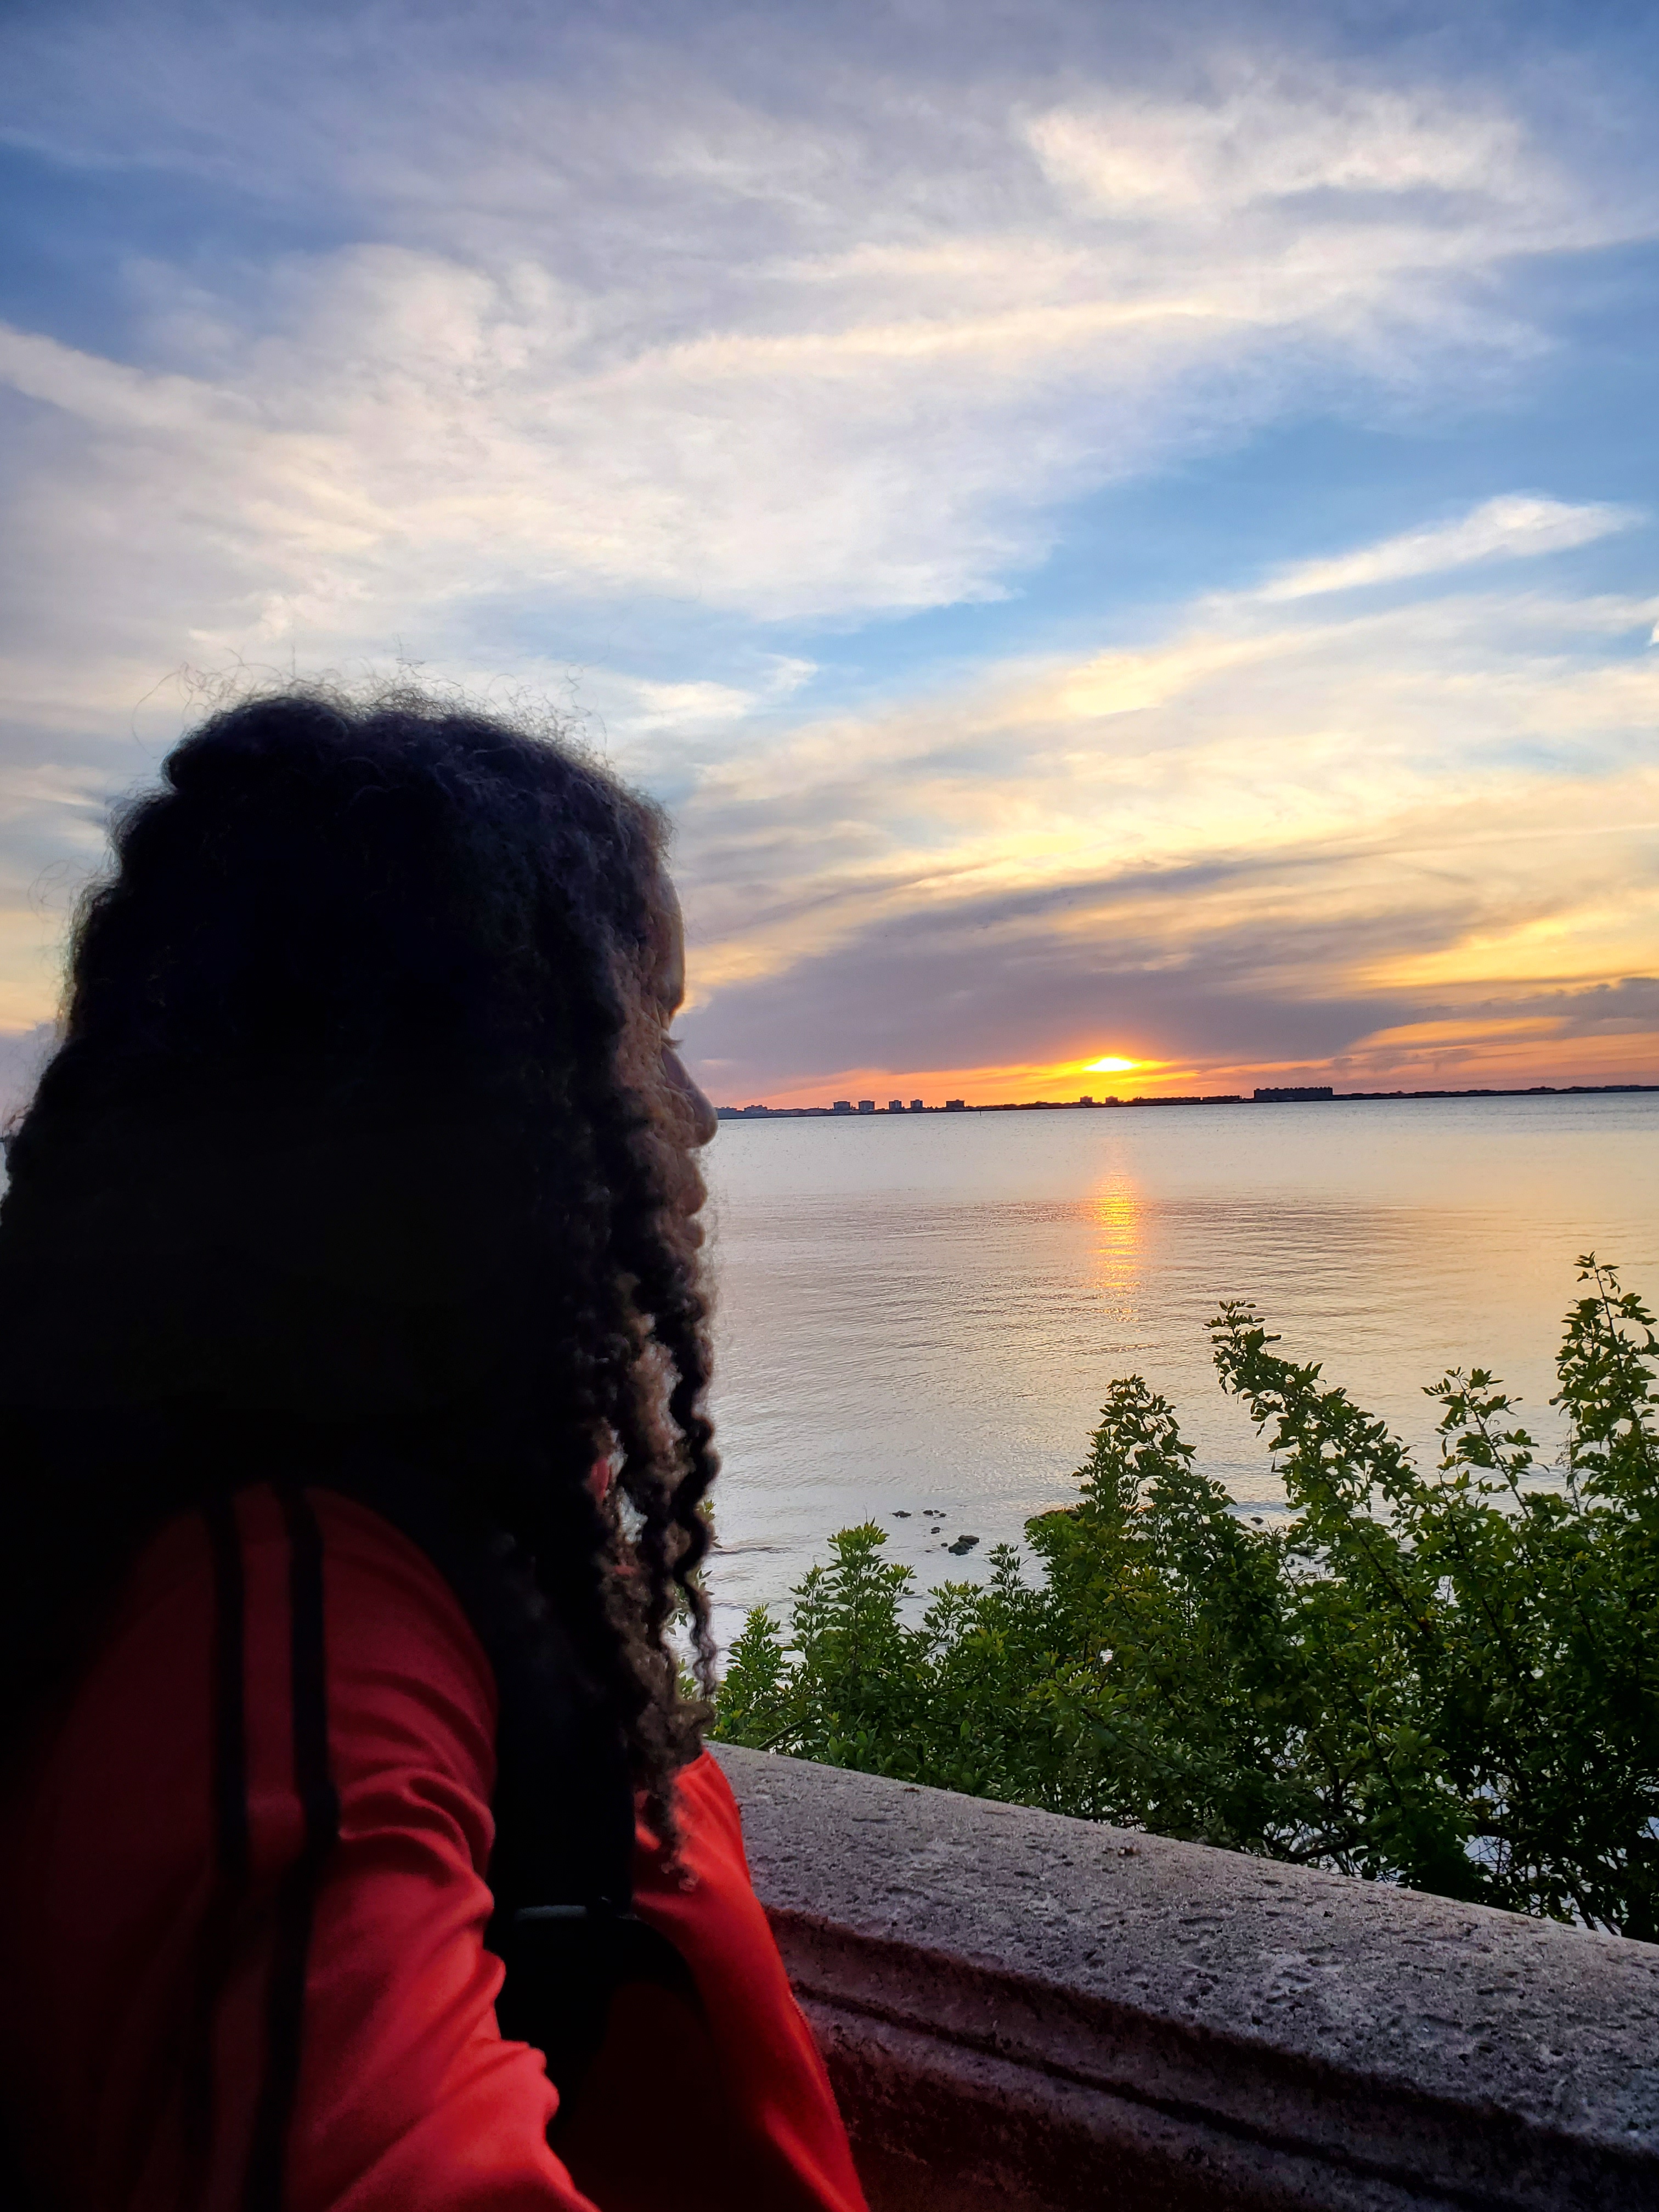 Image of Alyscia Cunningham with the sunset in the background.